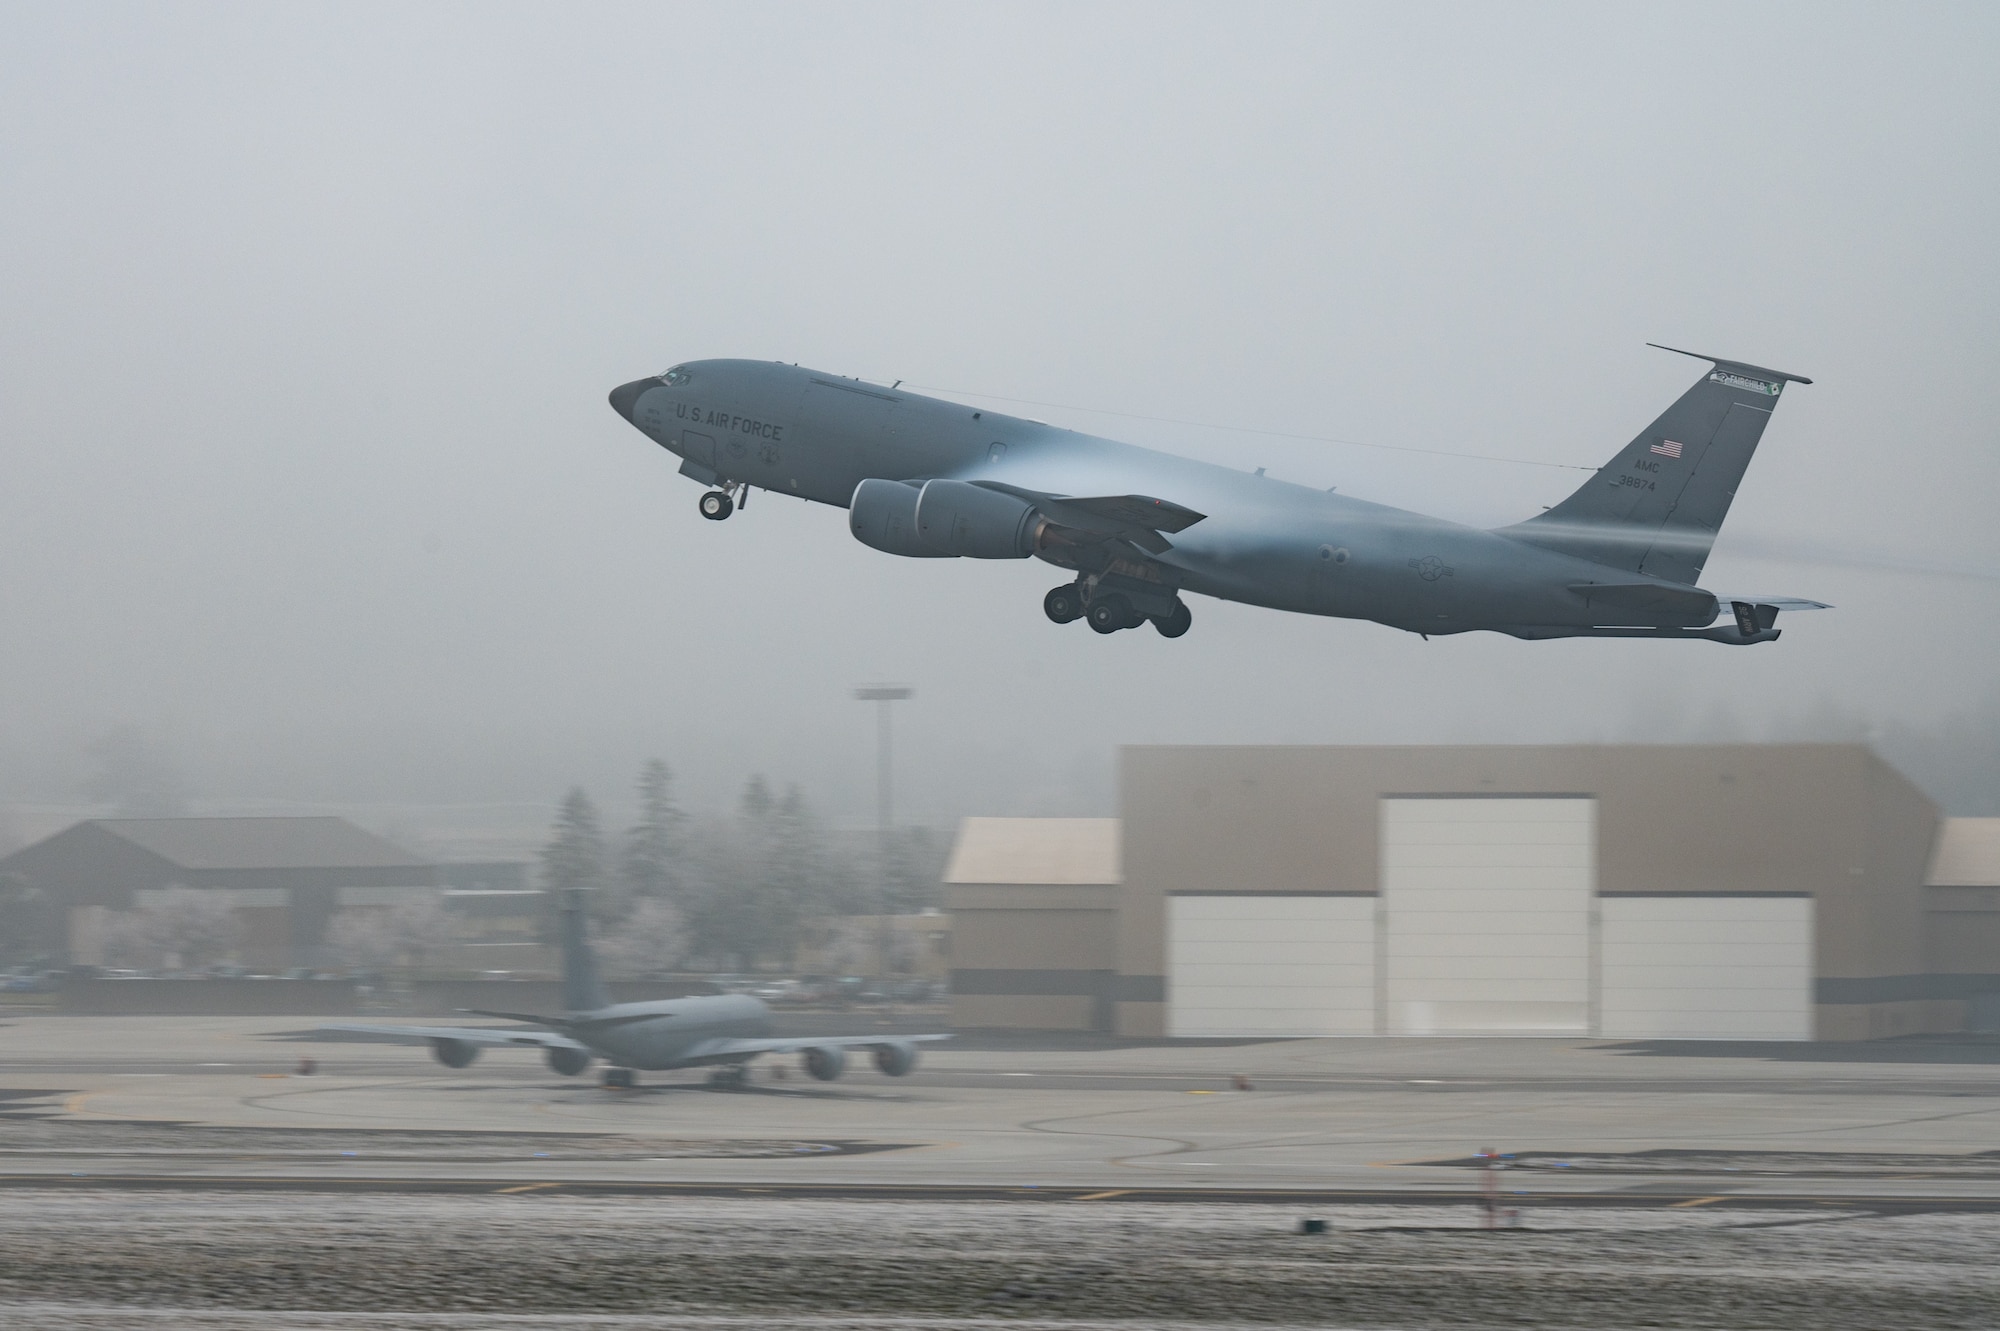 KC-135 takes off from flight line